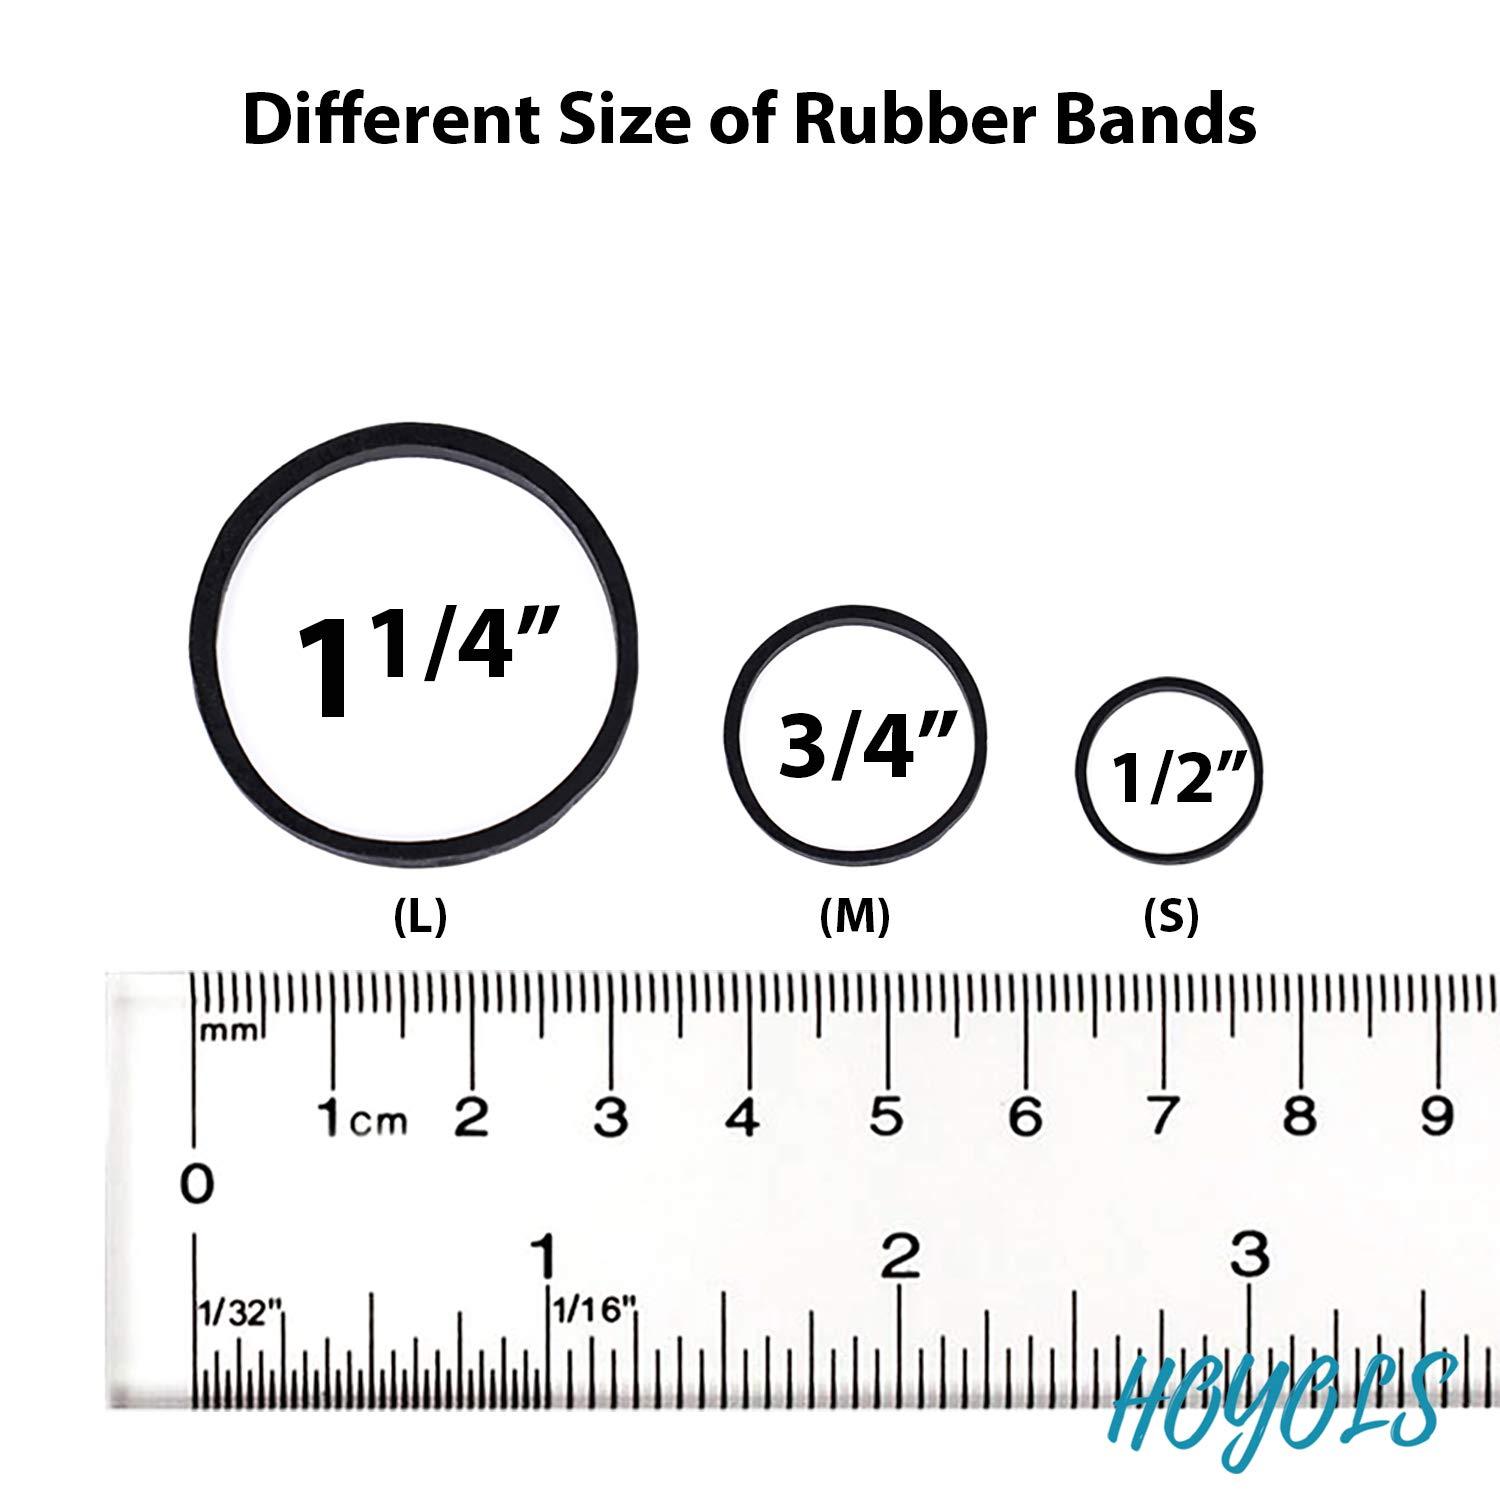 Rubber bands size chart